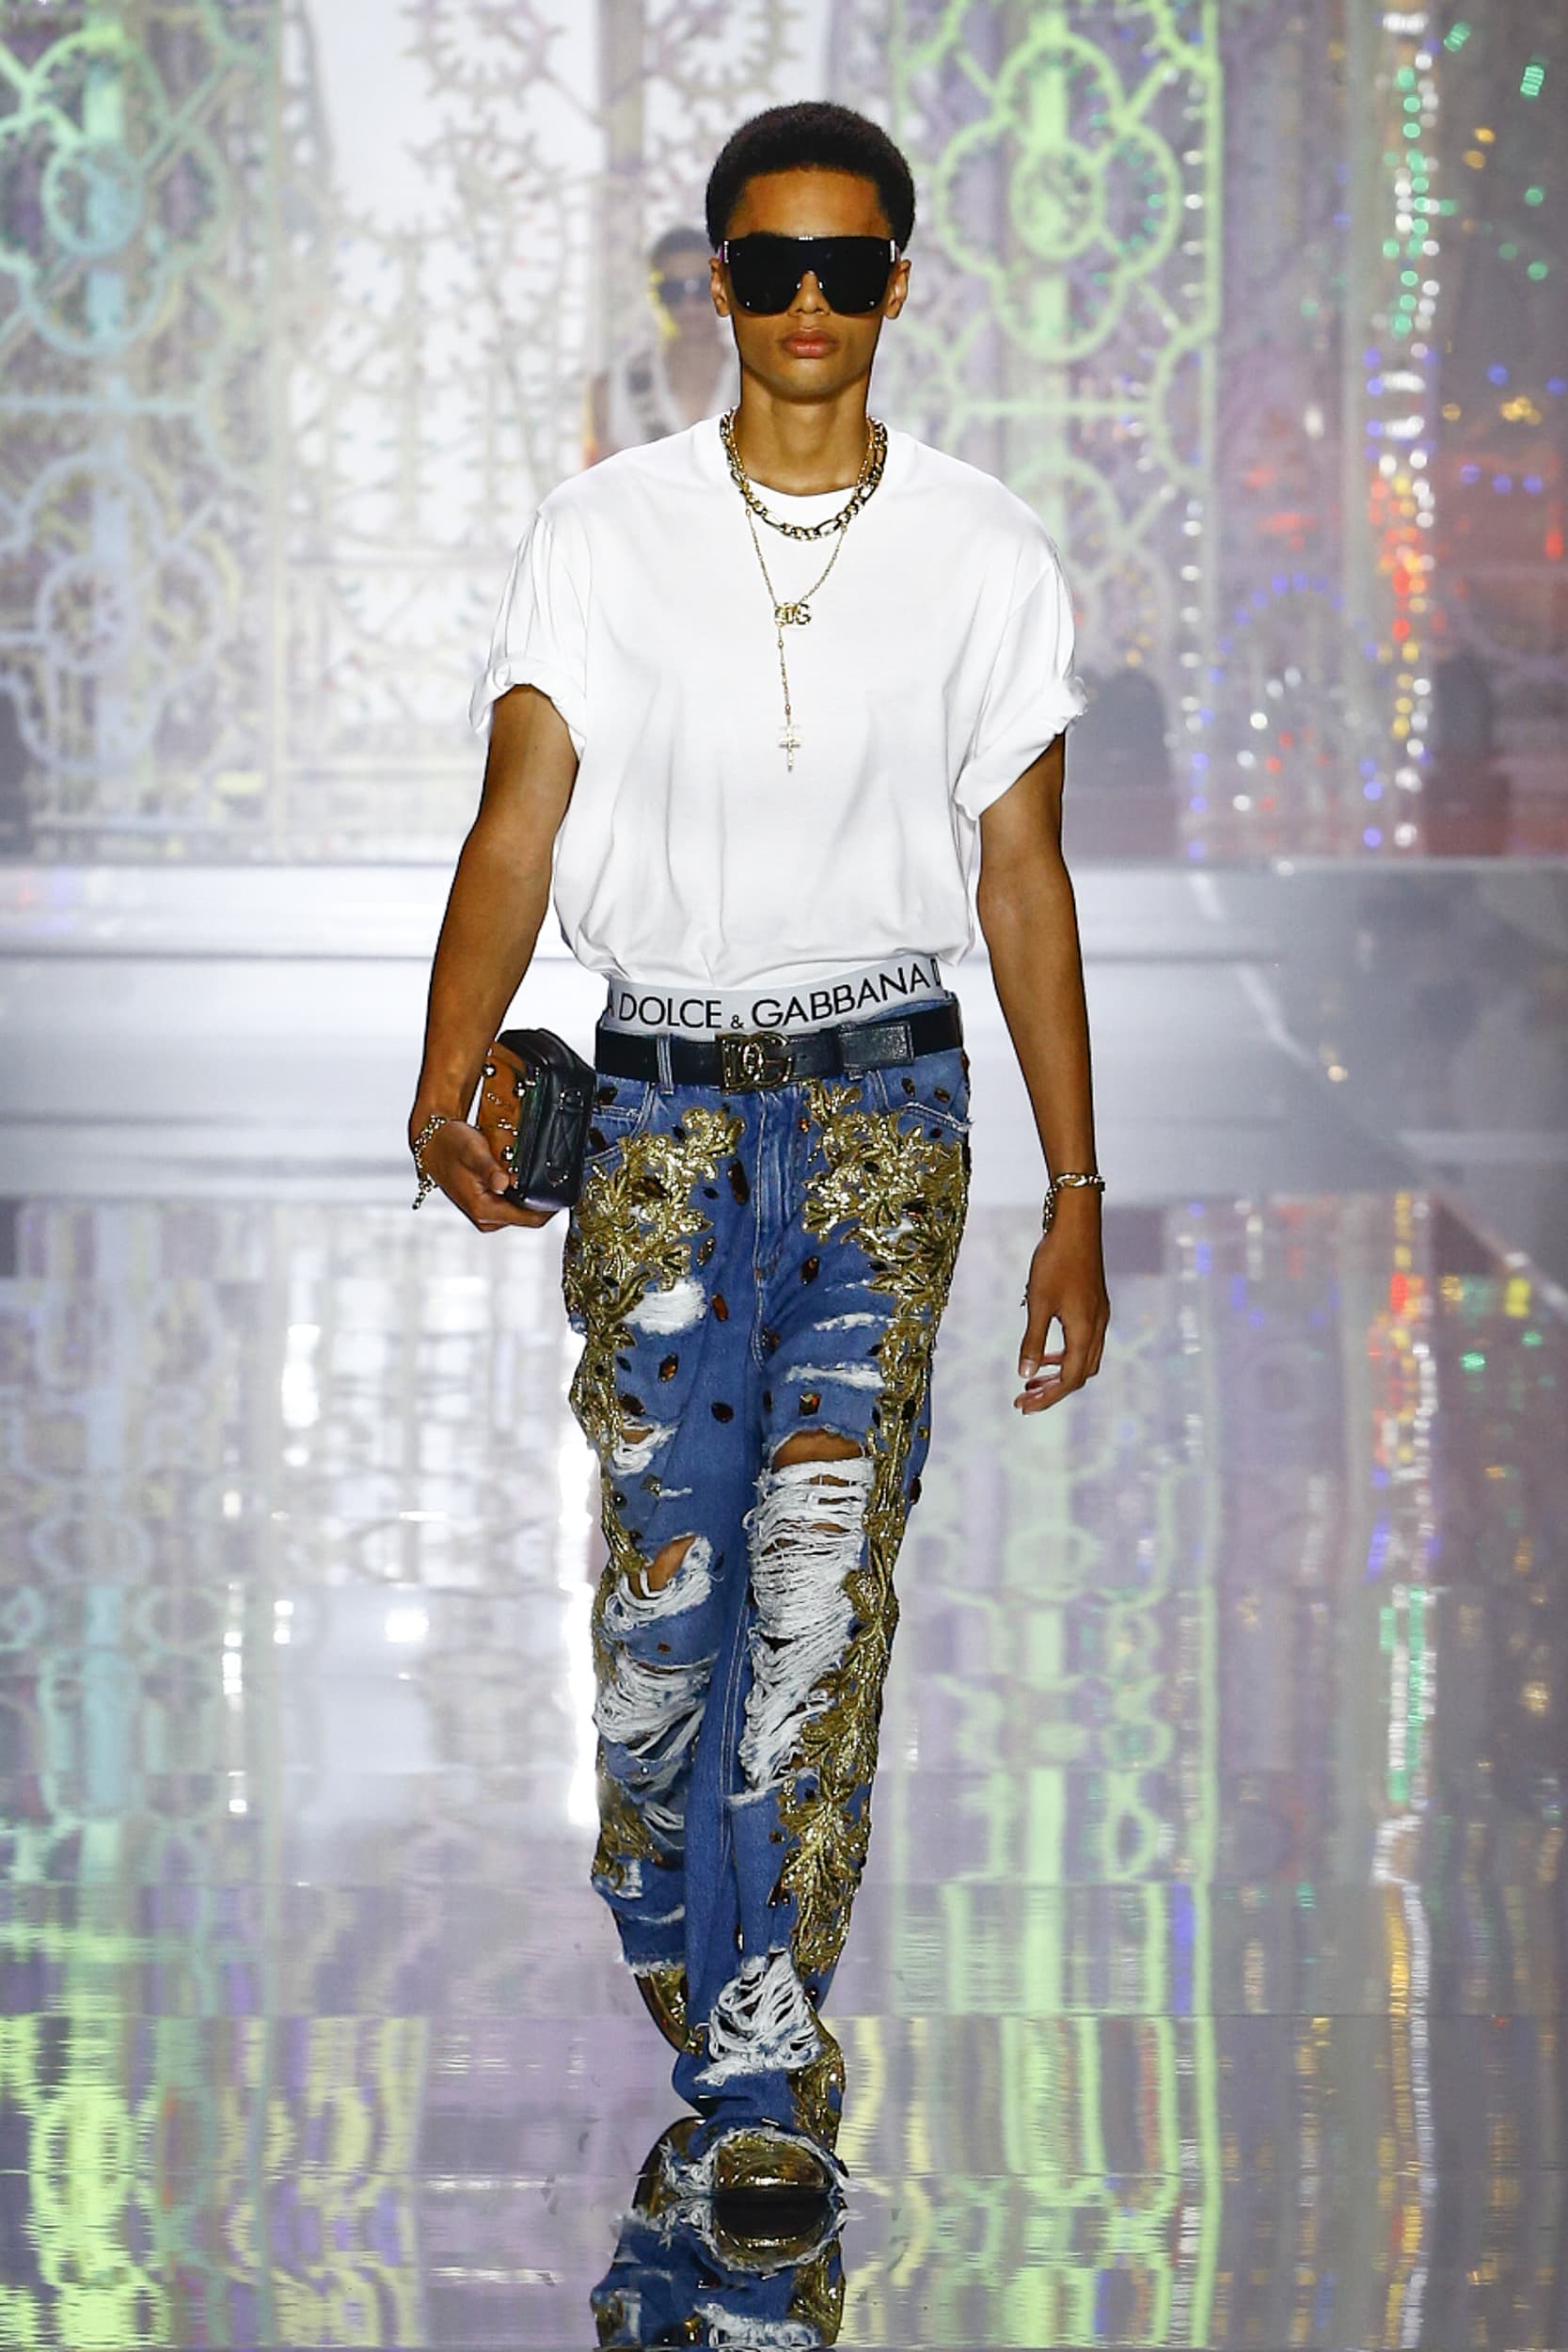 Dolce & Gabbana Spring 2022 Men's Fashion Show Review | The Impression